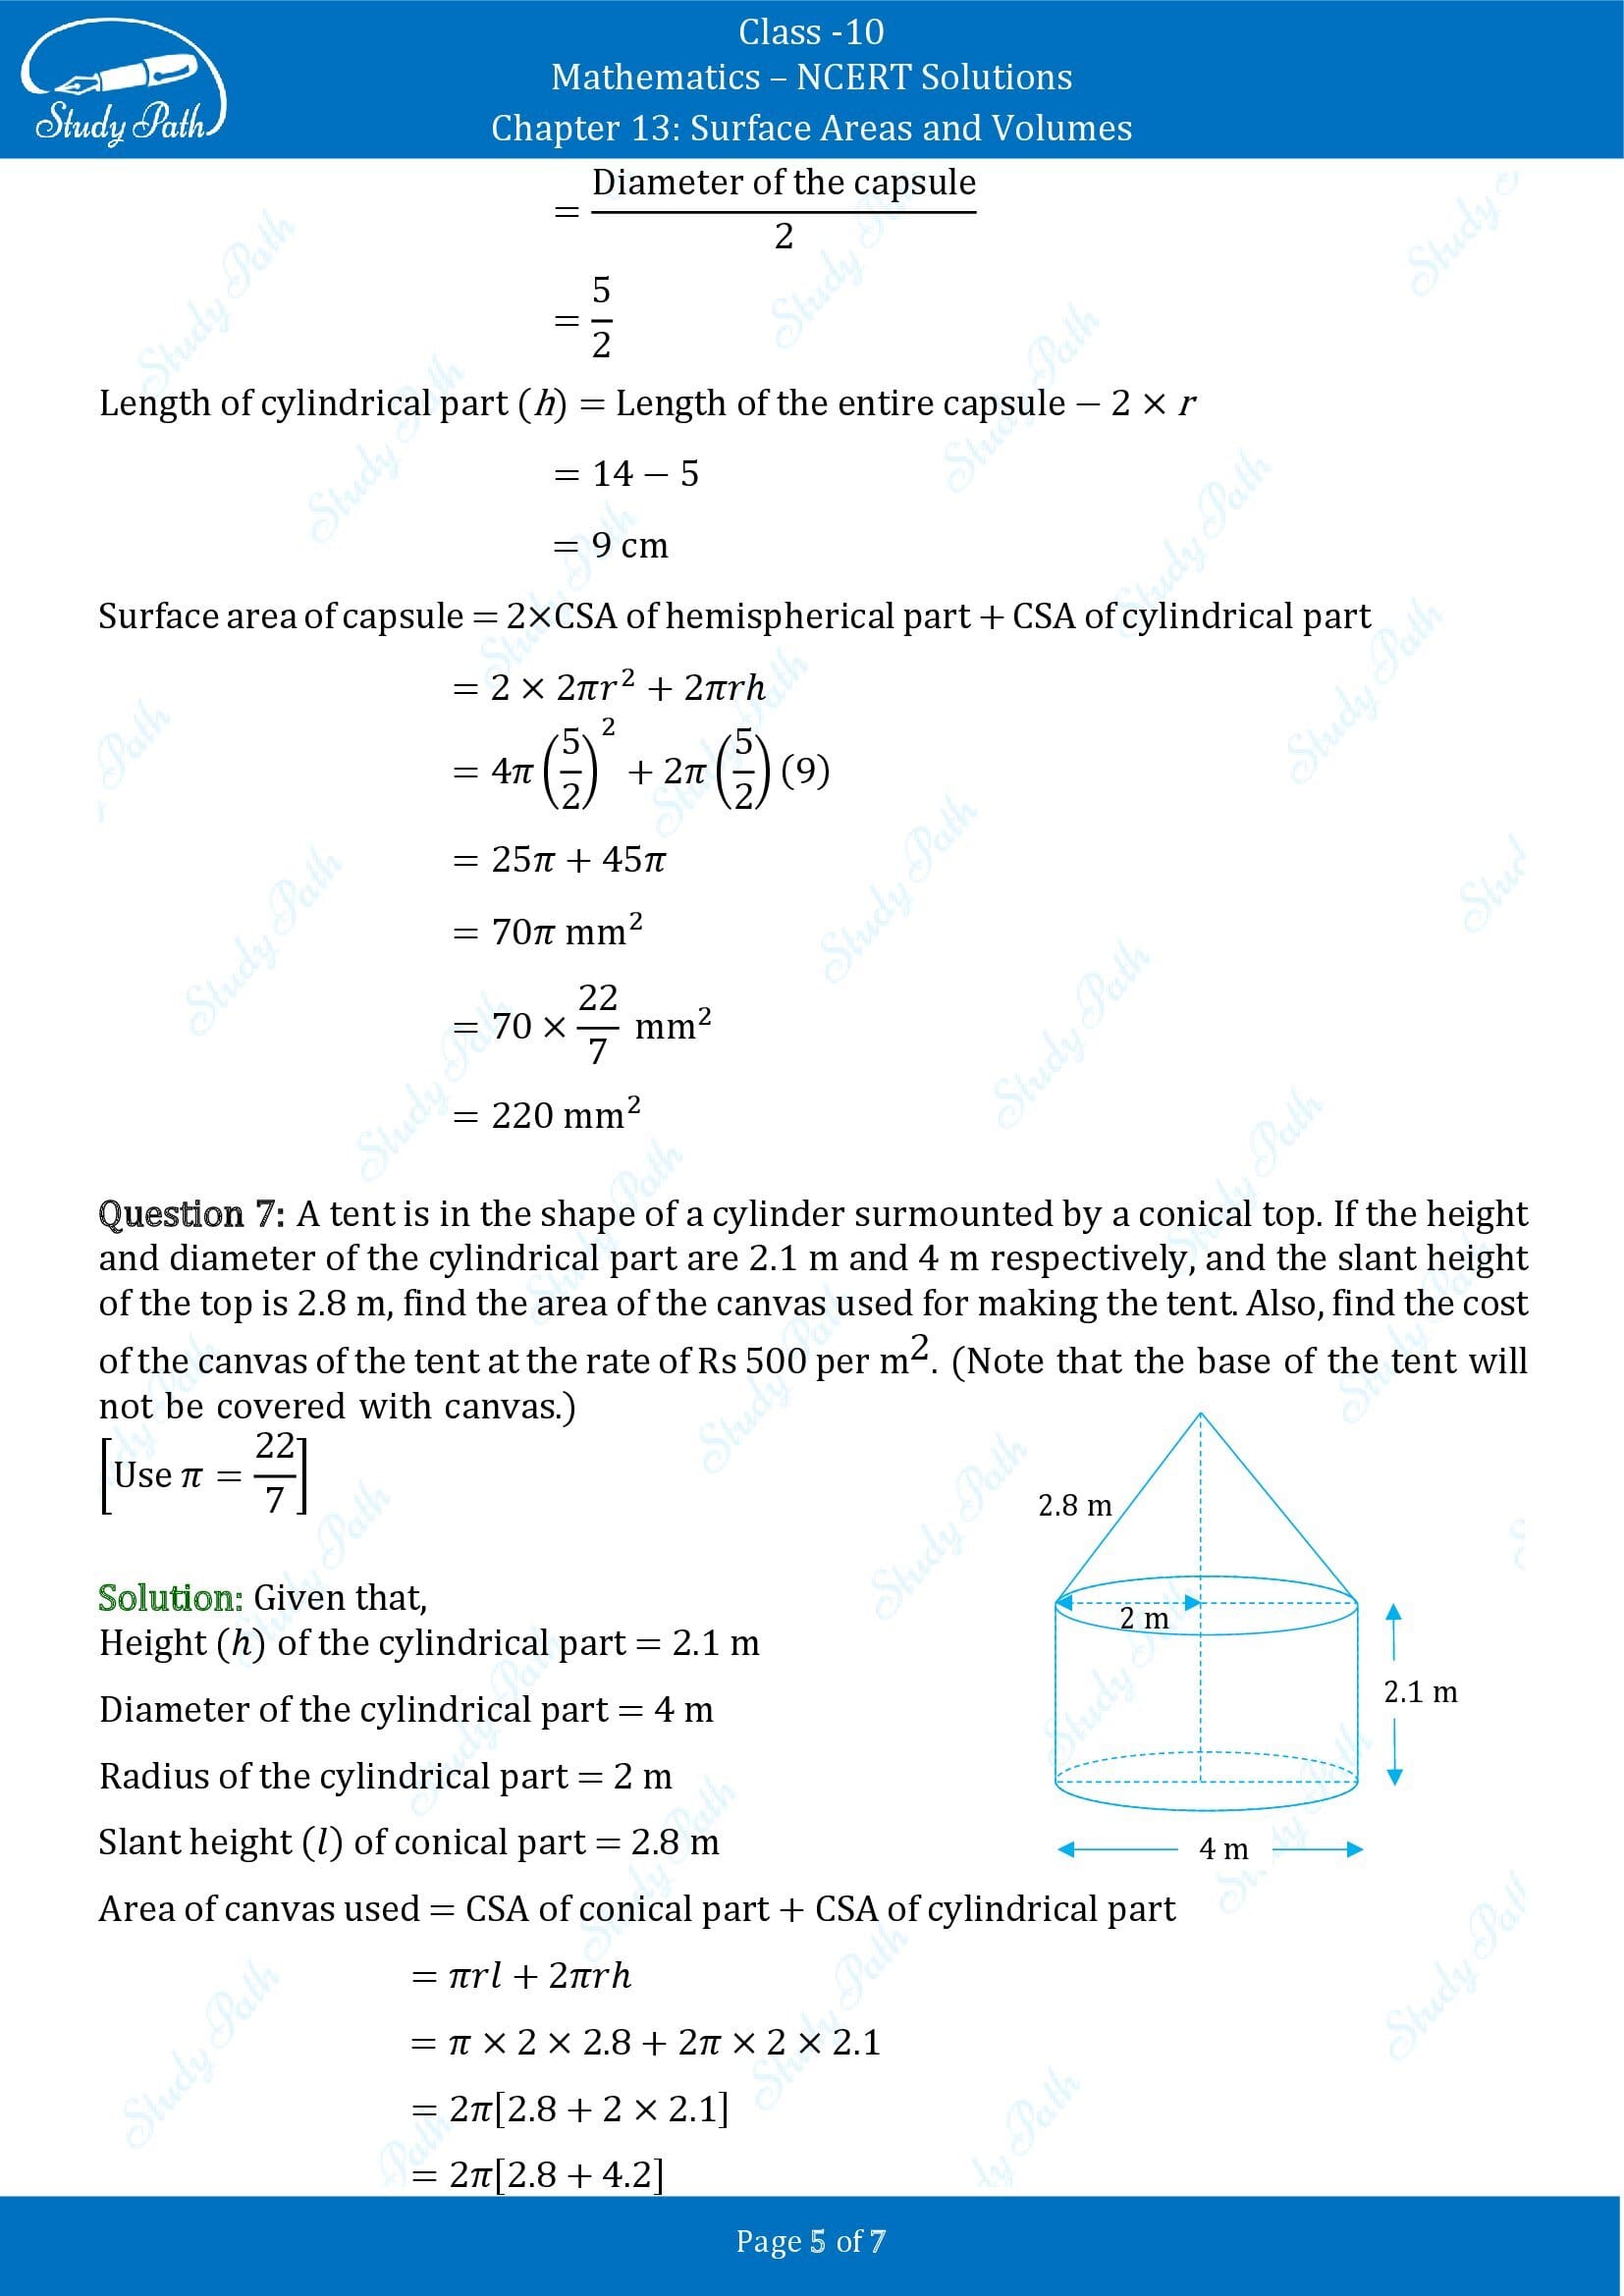 NCERT Solutions for Class 10 Maths Chapter 13 Surface Areas and Volumes Exercise 13.1 00005